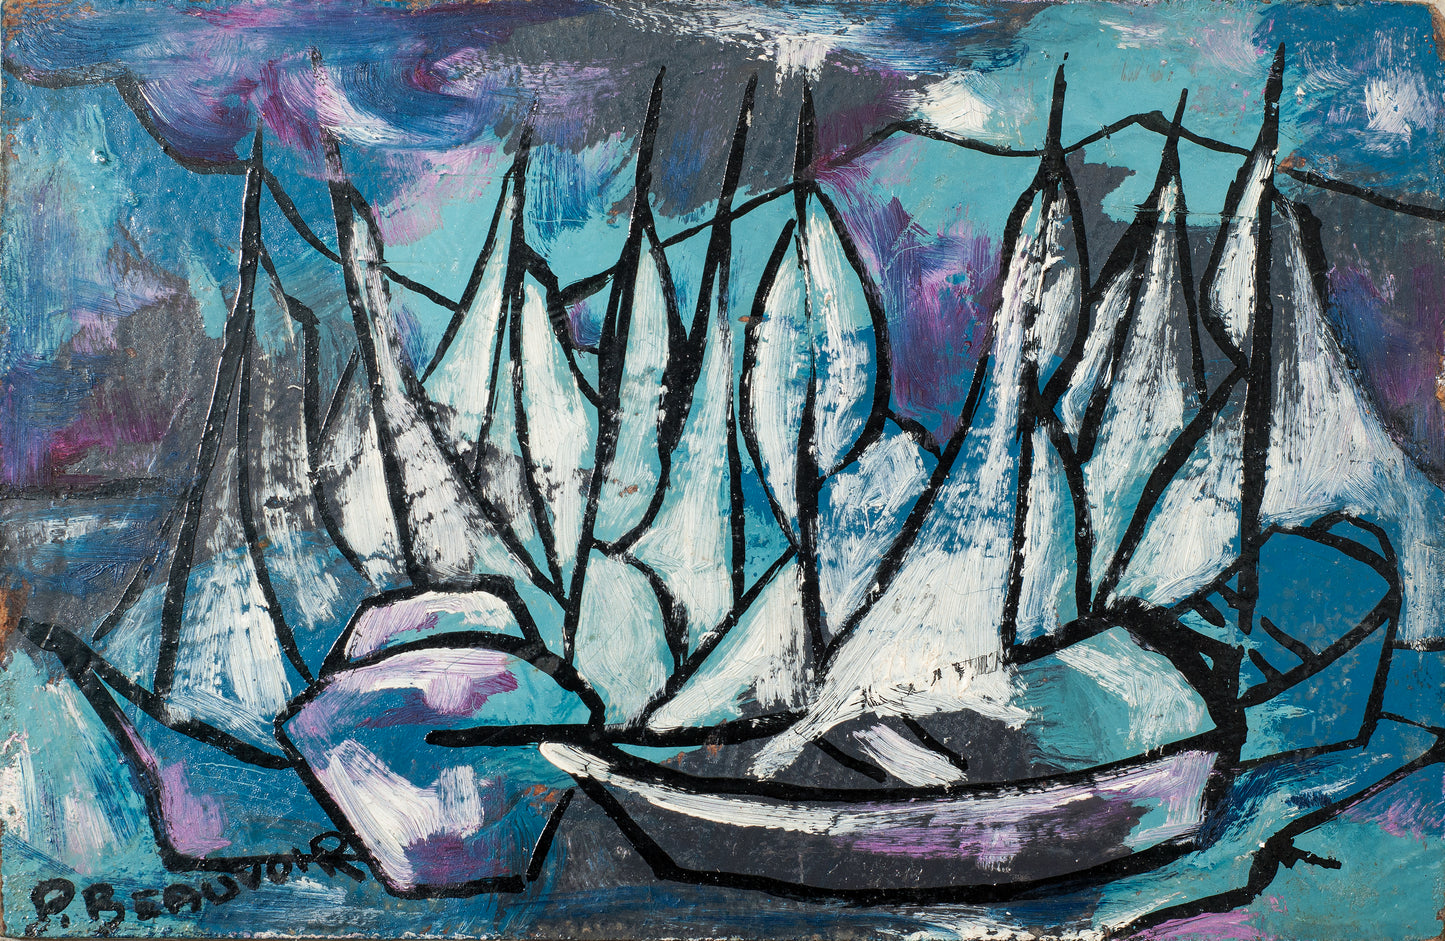 Paul Beauvoir (1932-1972) 4"x6" Blue Boats Collector's Item c1970 Oil on Board Painting #7-1-93GSN-Fondation Marie & Georges S. Nader